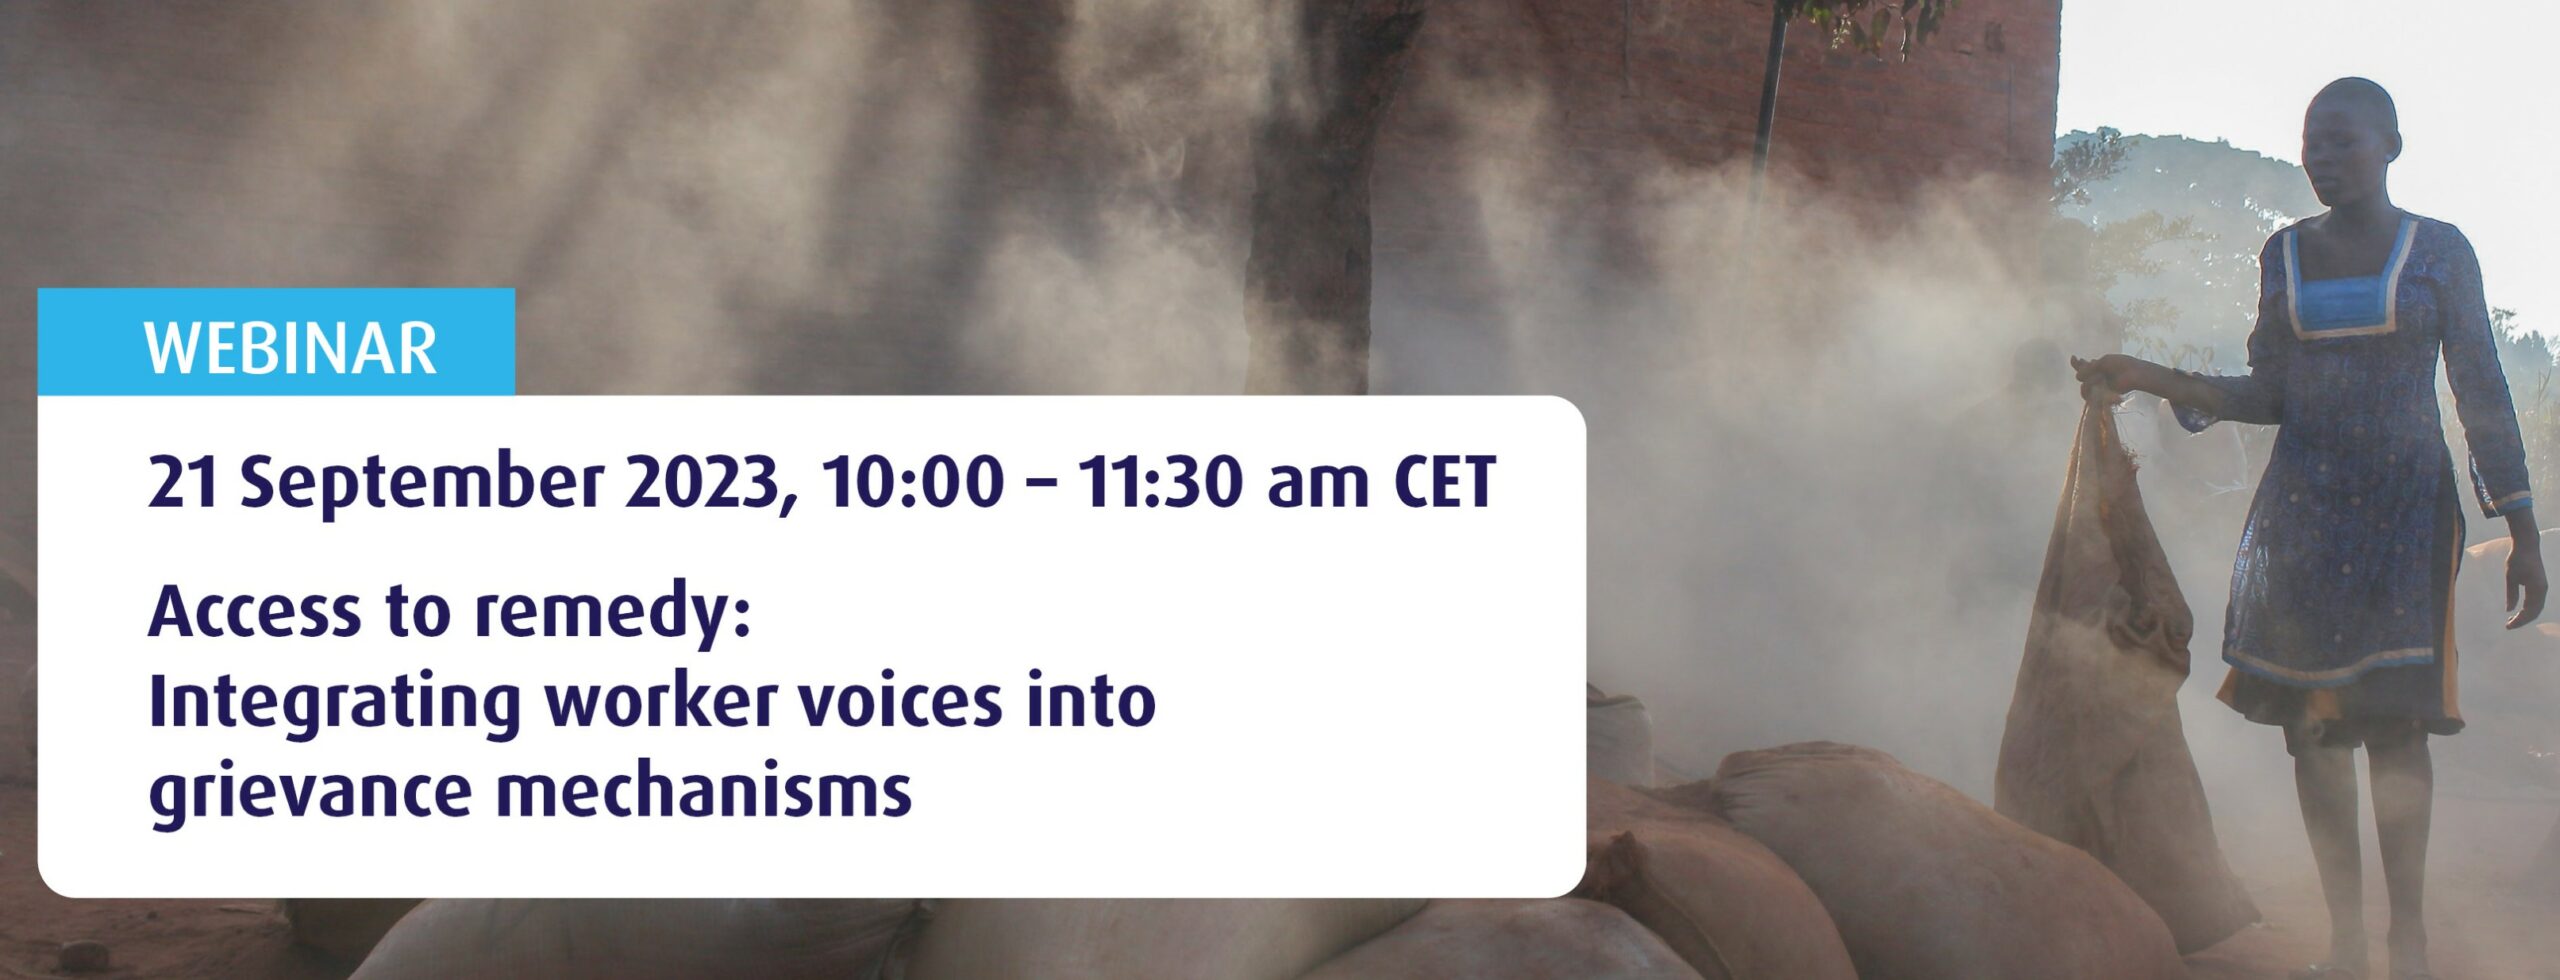 Webinar 'Access to remedy: integrating worker voices into grievance mechanisms'